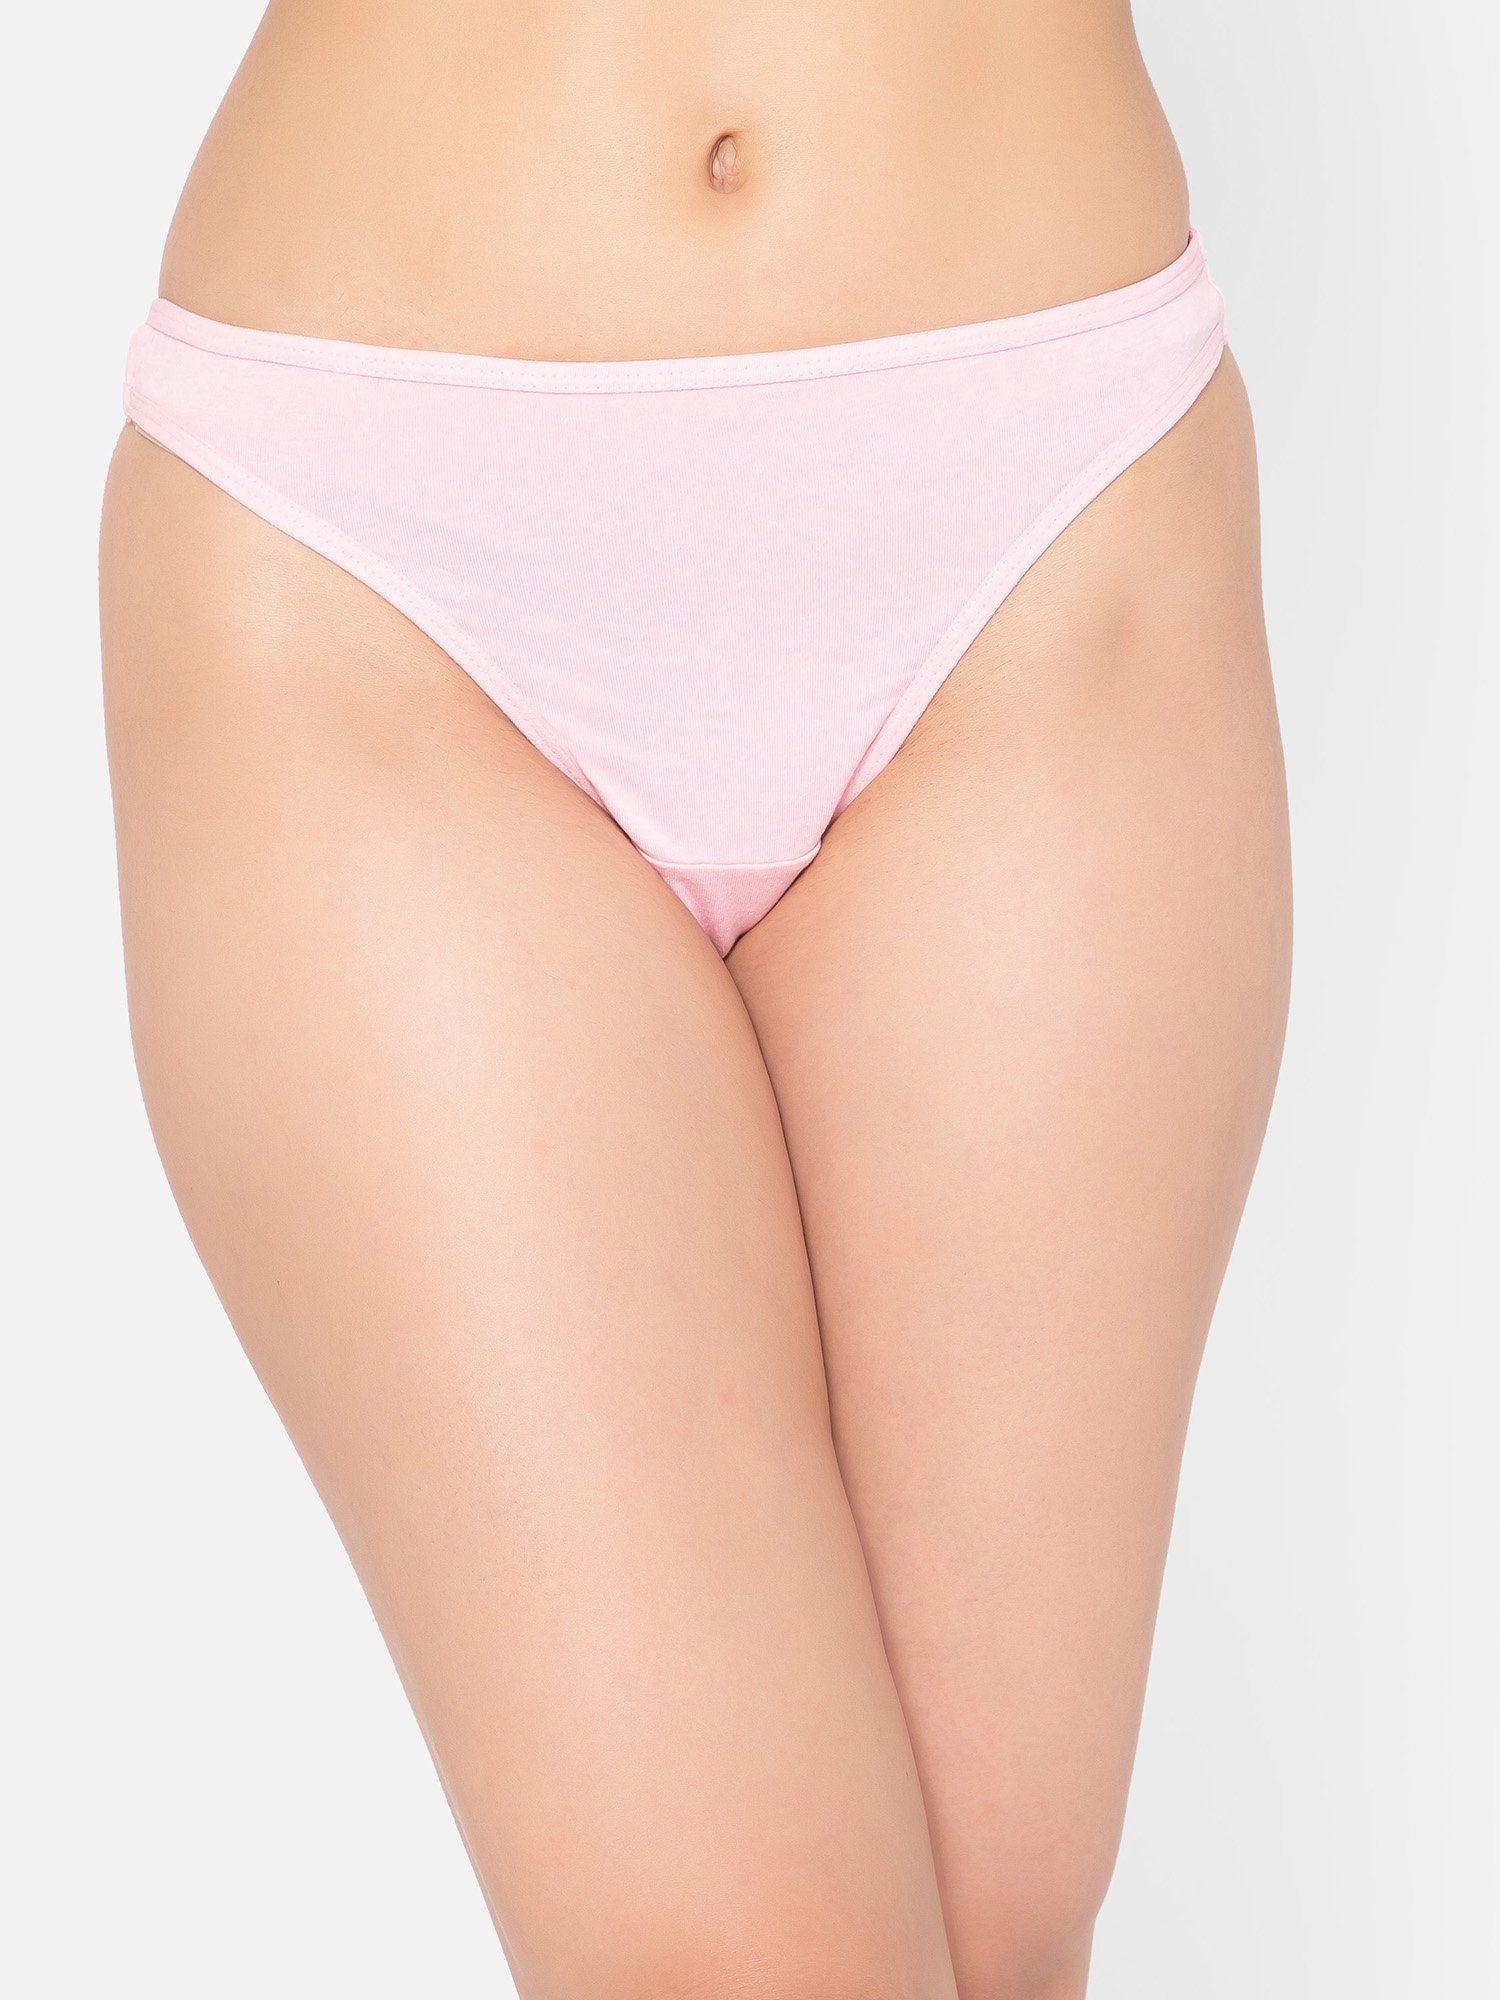 low waist thong in baby pink - cotton